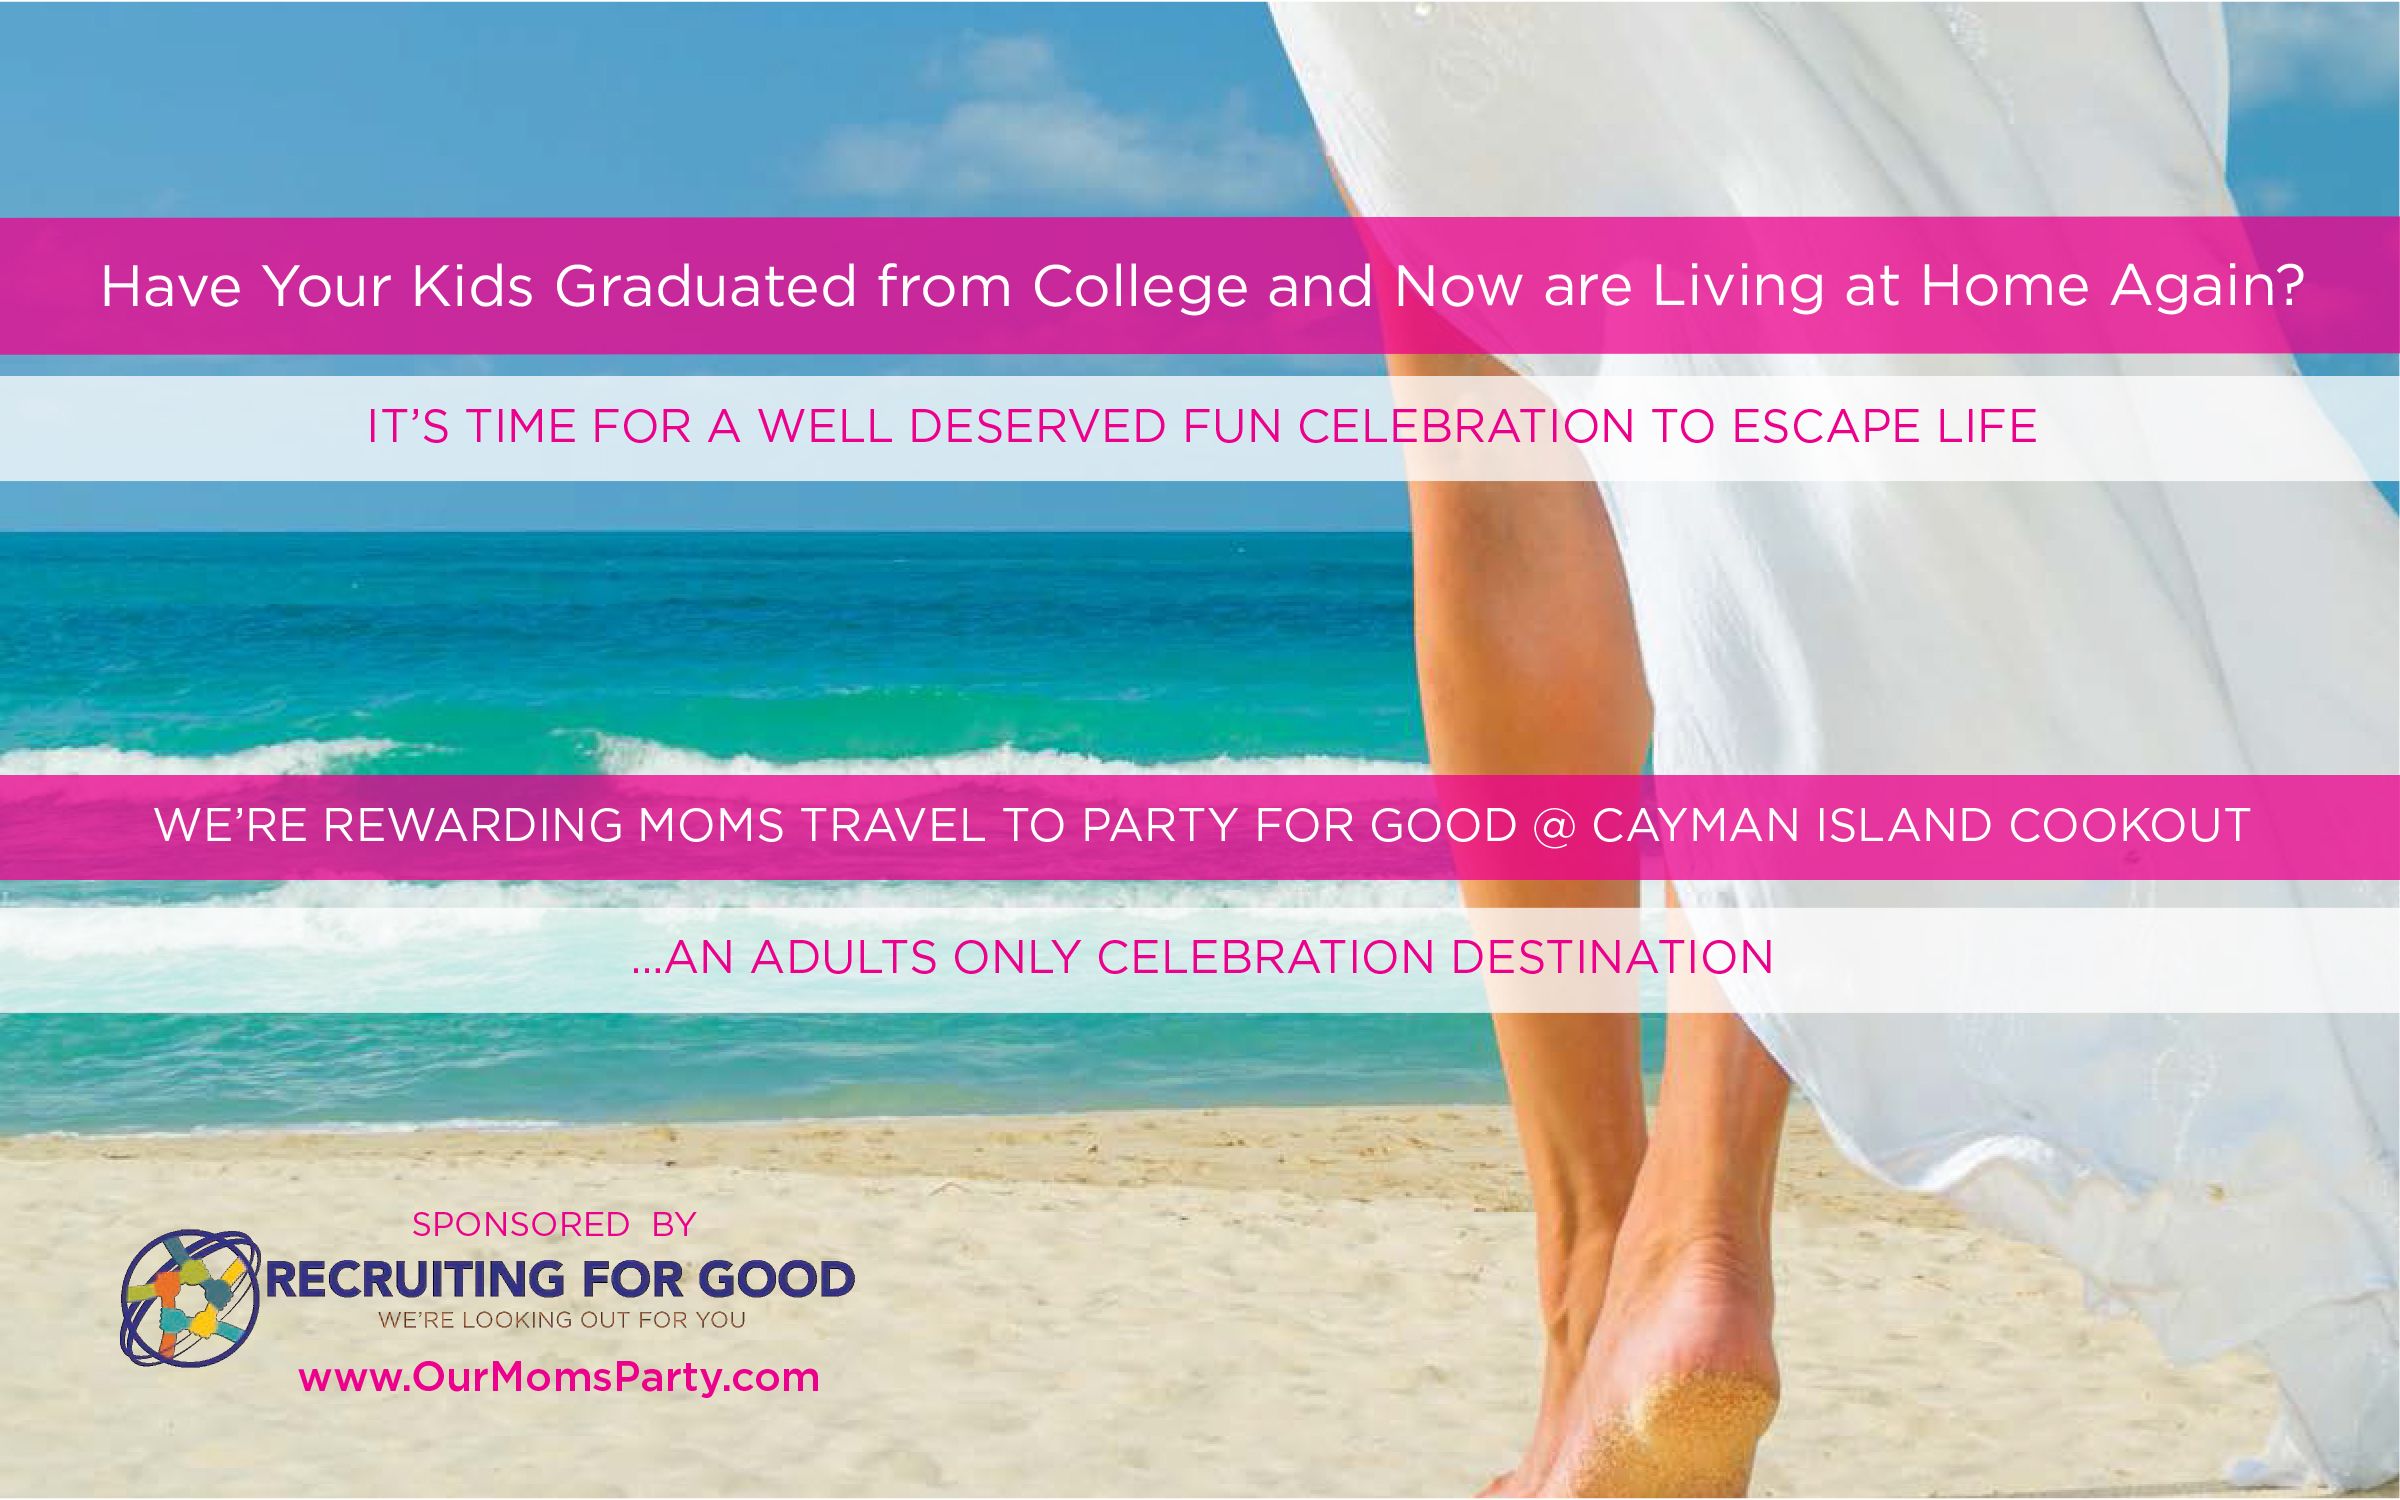 We're Making it Easier for Moms to Leave the Kids at Home ...Enjoy a Rewarding Adult Only Weekend Party for Good